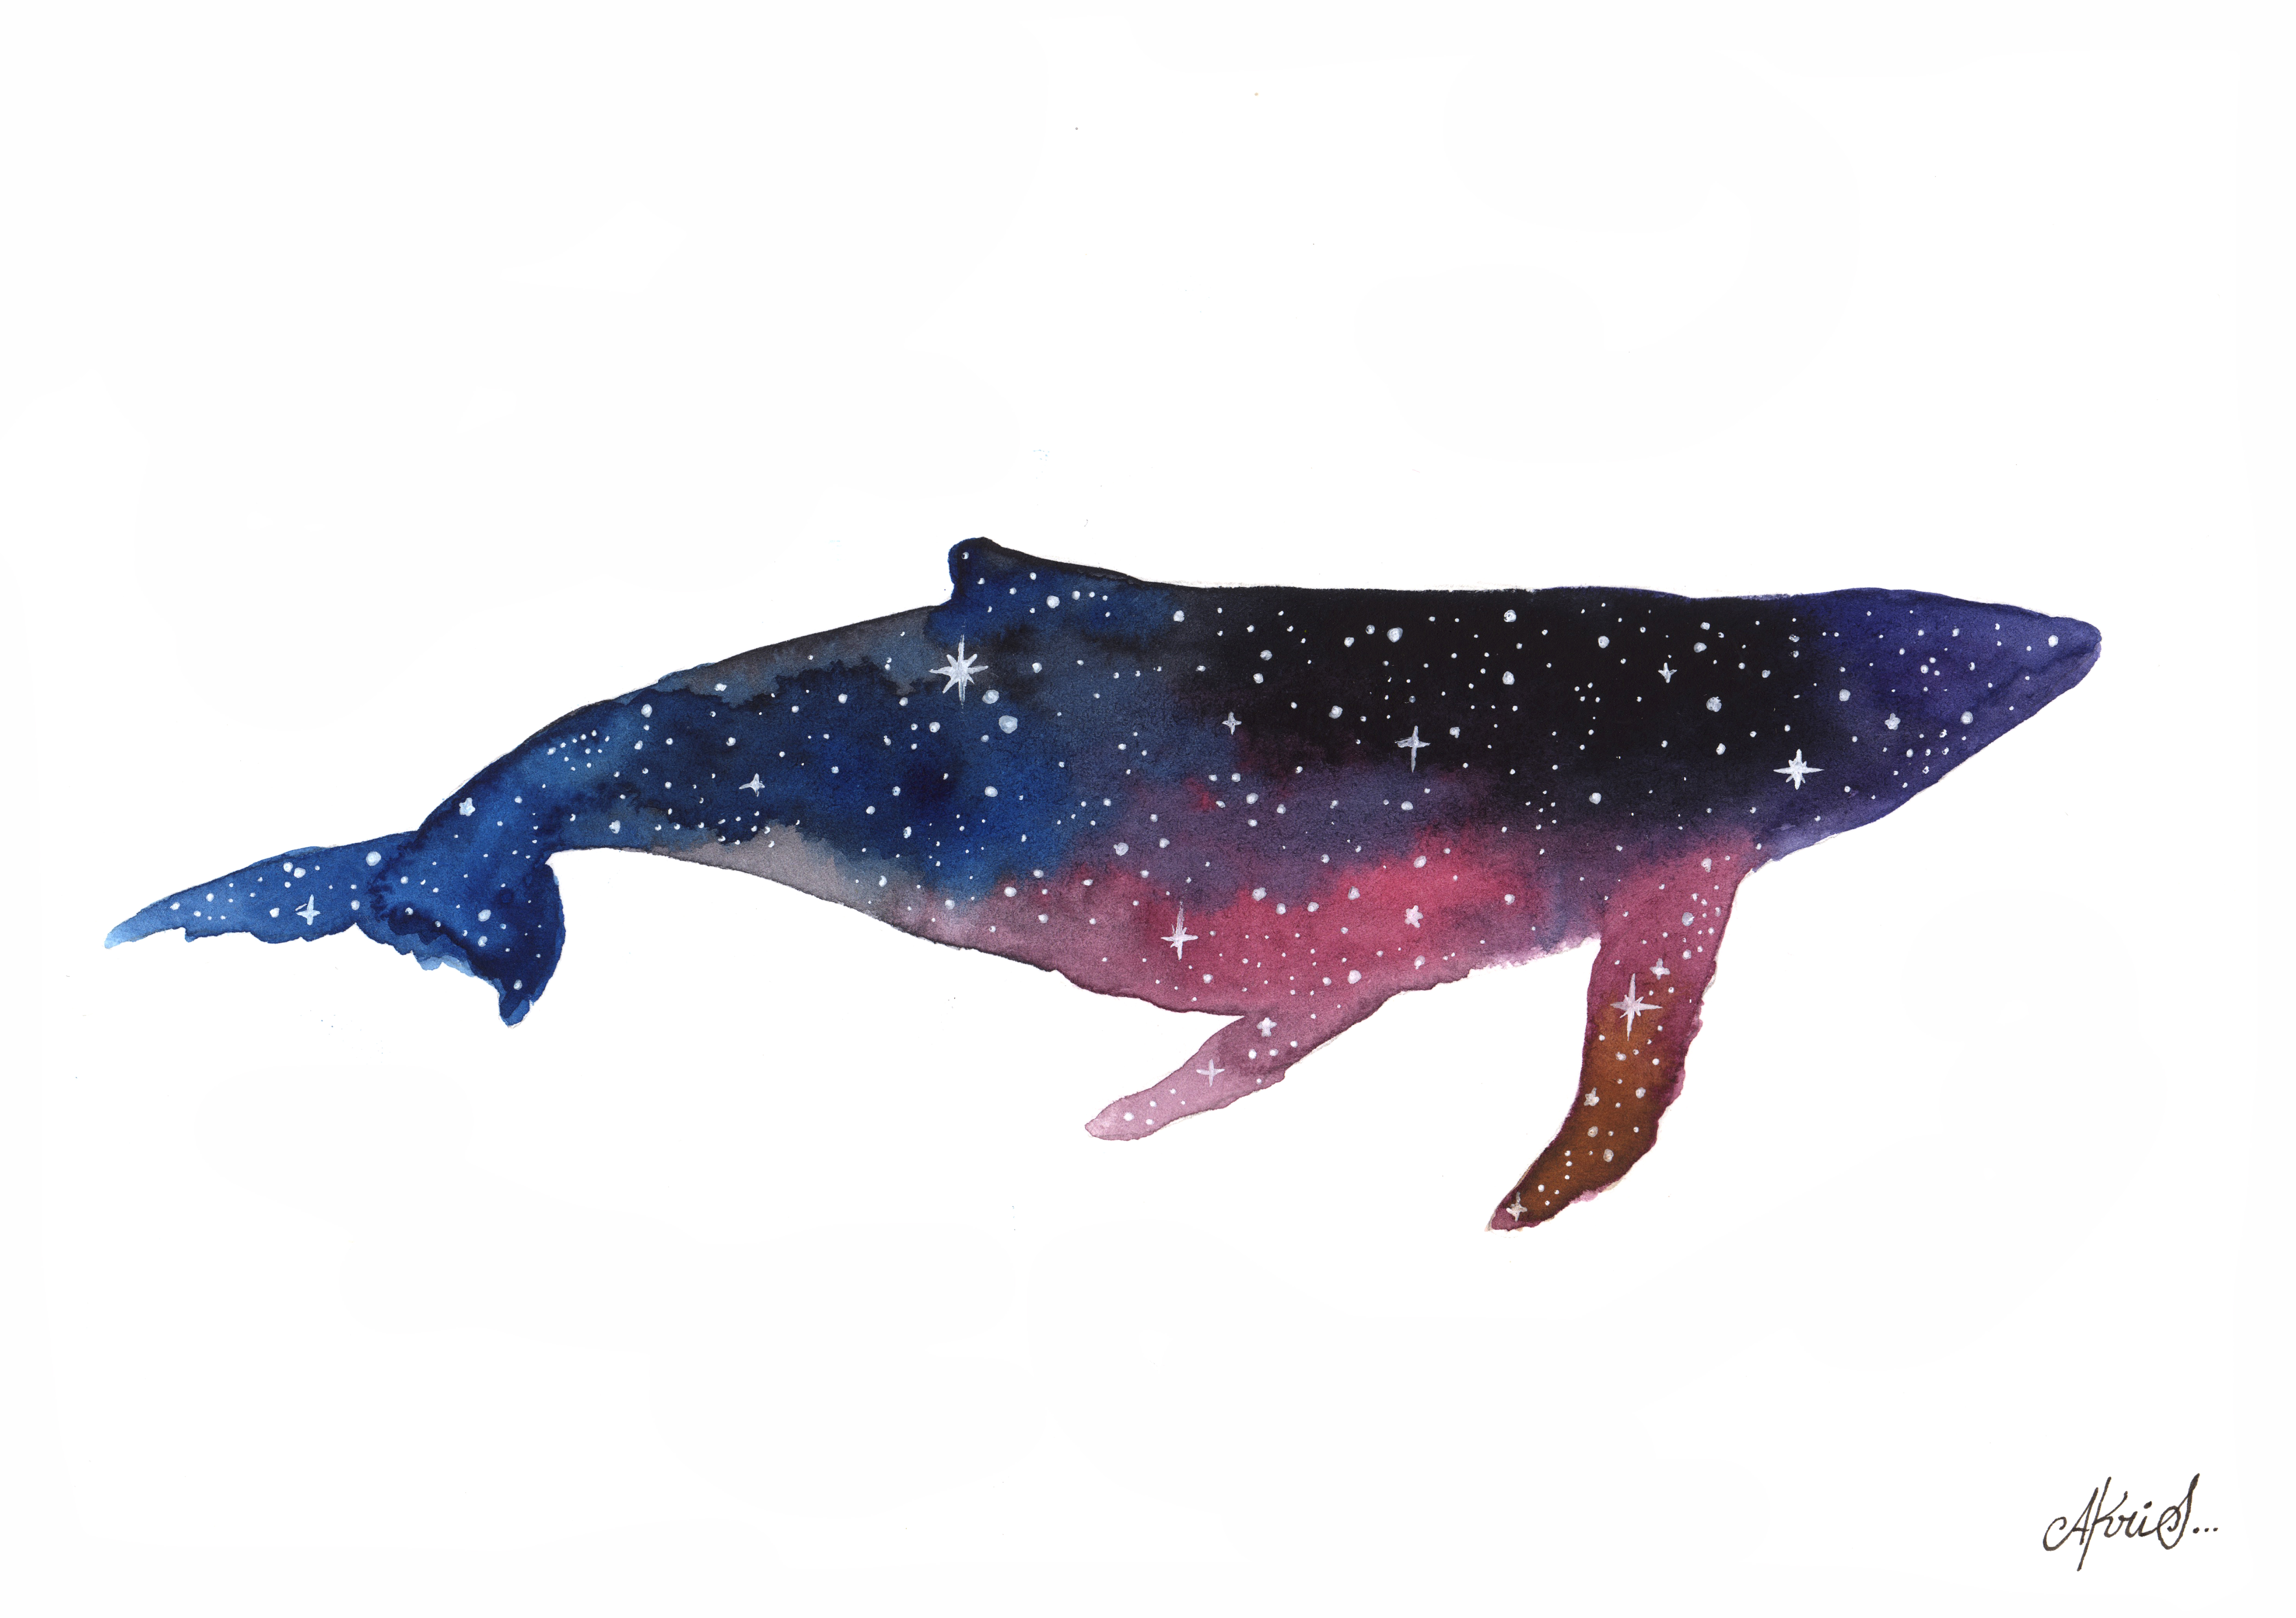 The Universe in a whale